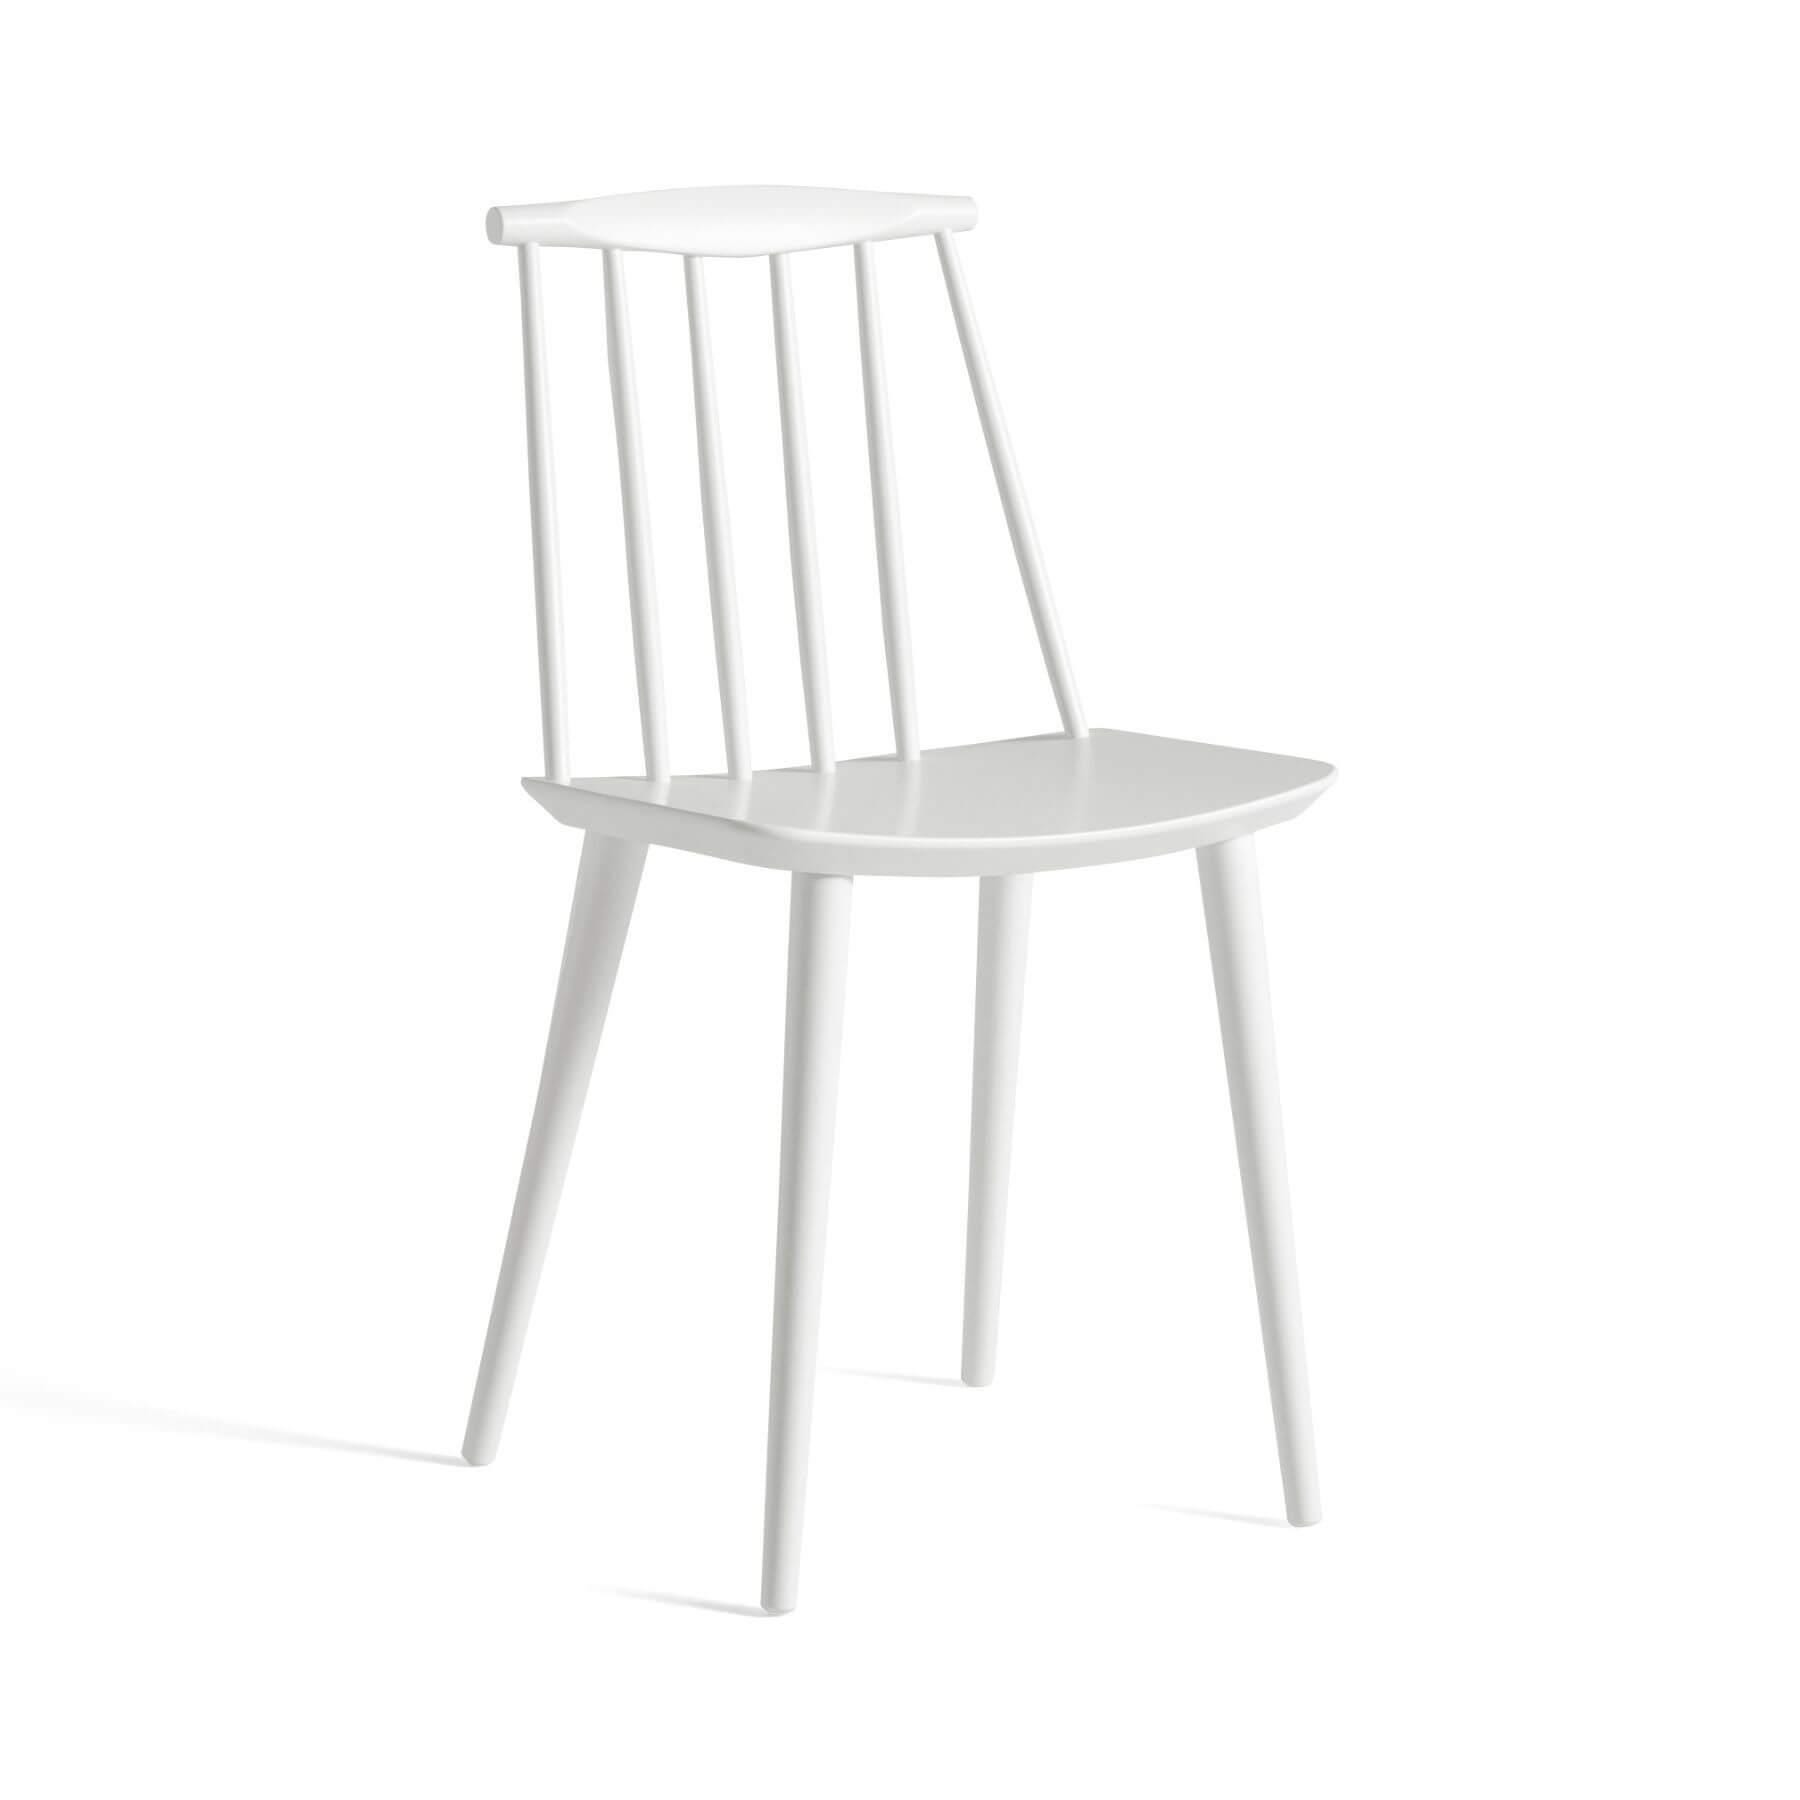 Hay Jseries 77 Dining Chair Beech Lacquered White Standard Gliders Designer Furniture From Holloways Of Ludlow